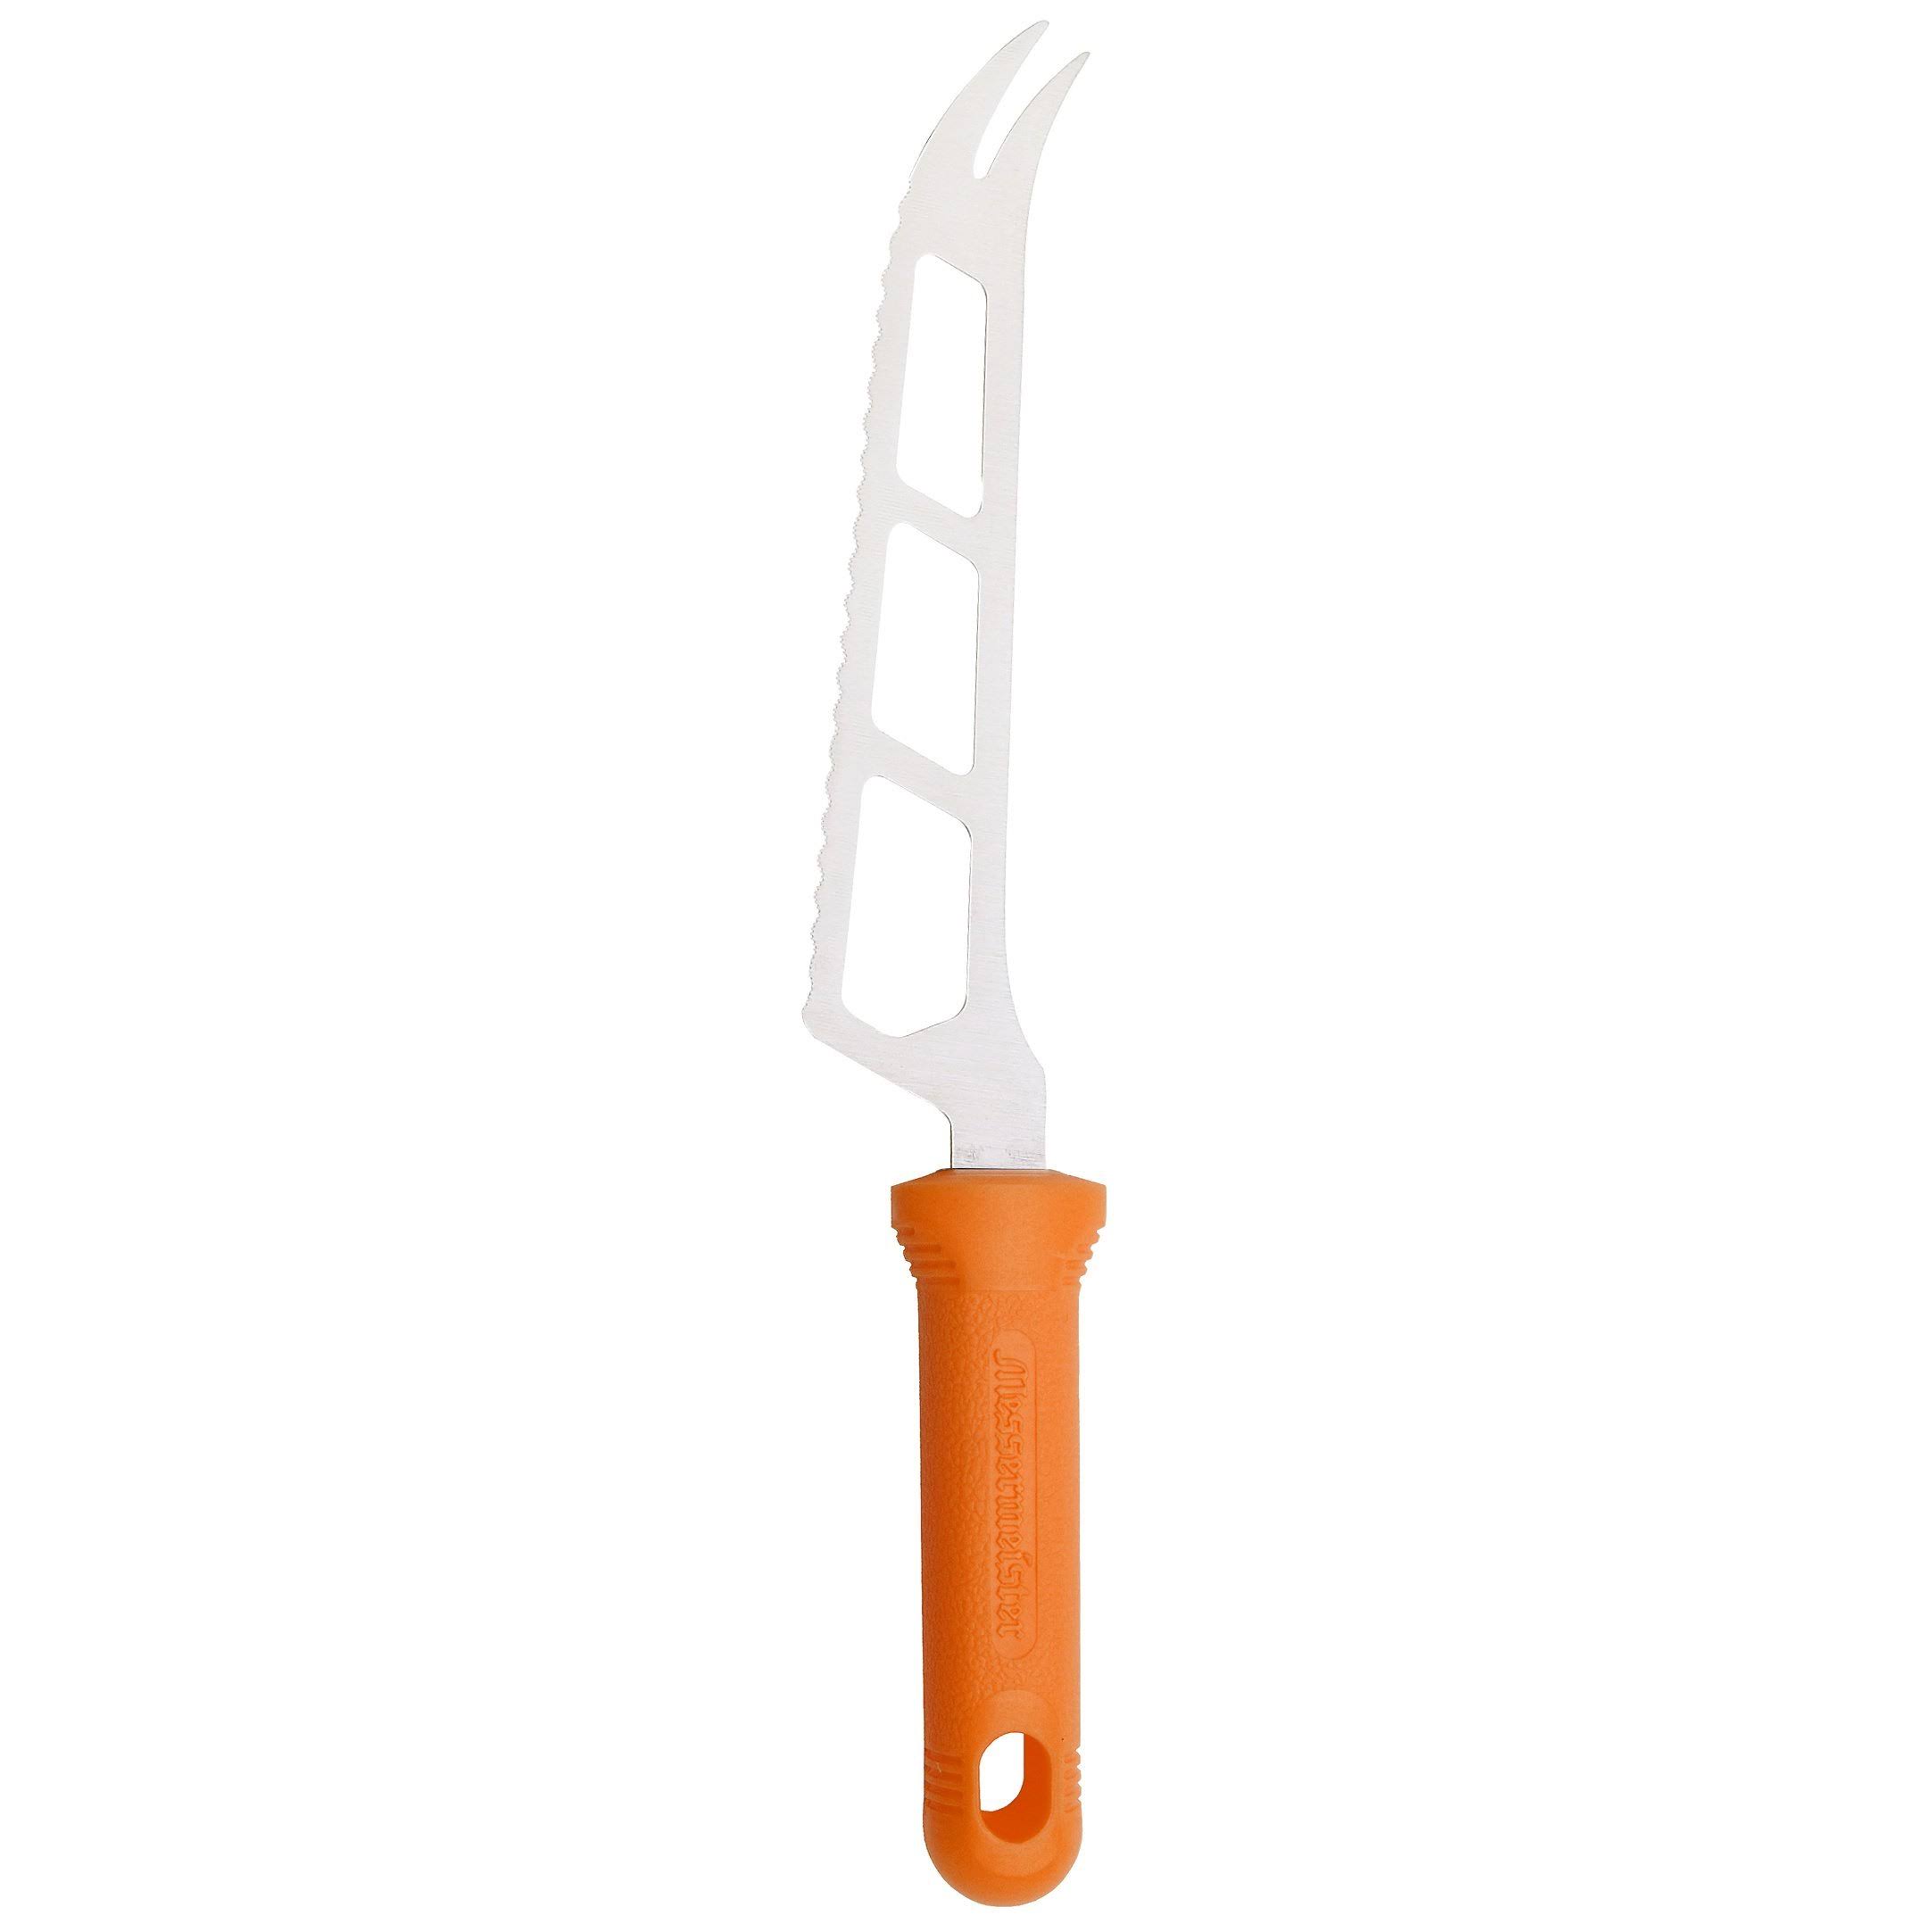 Messermeister Pro-touch Cheese and Tomato Knife - Orange, 6"